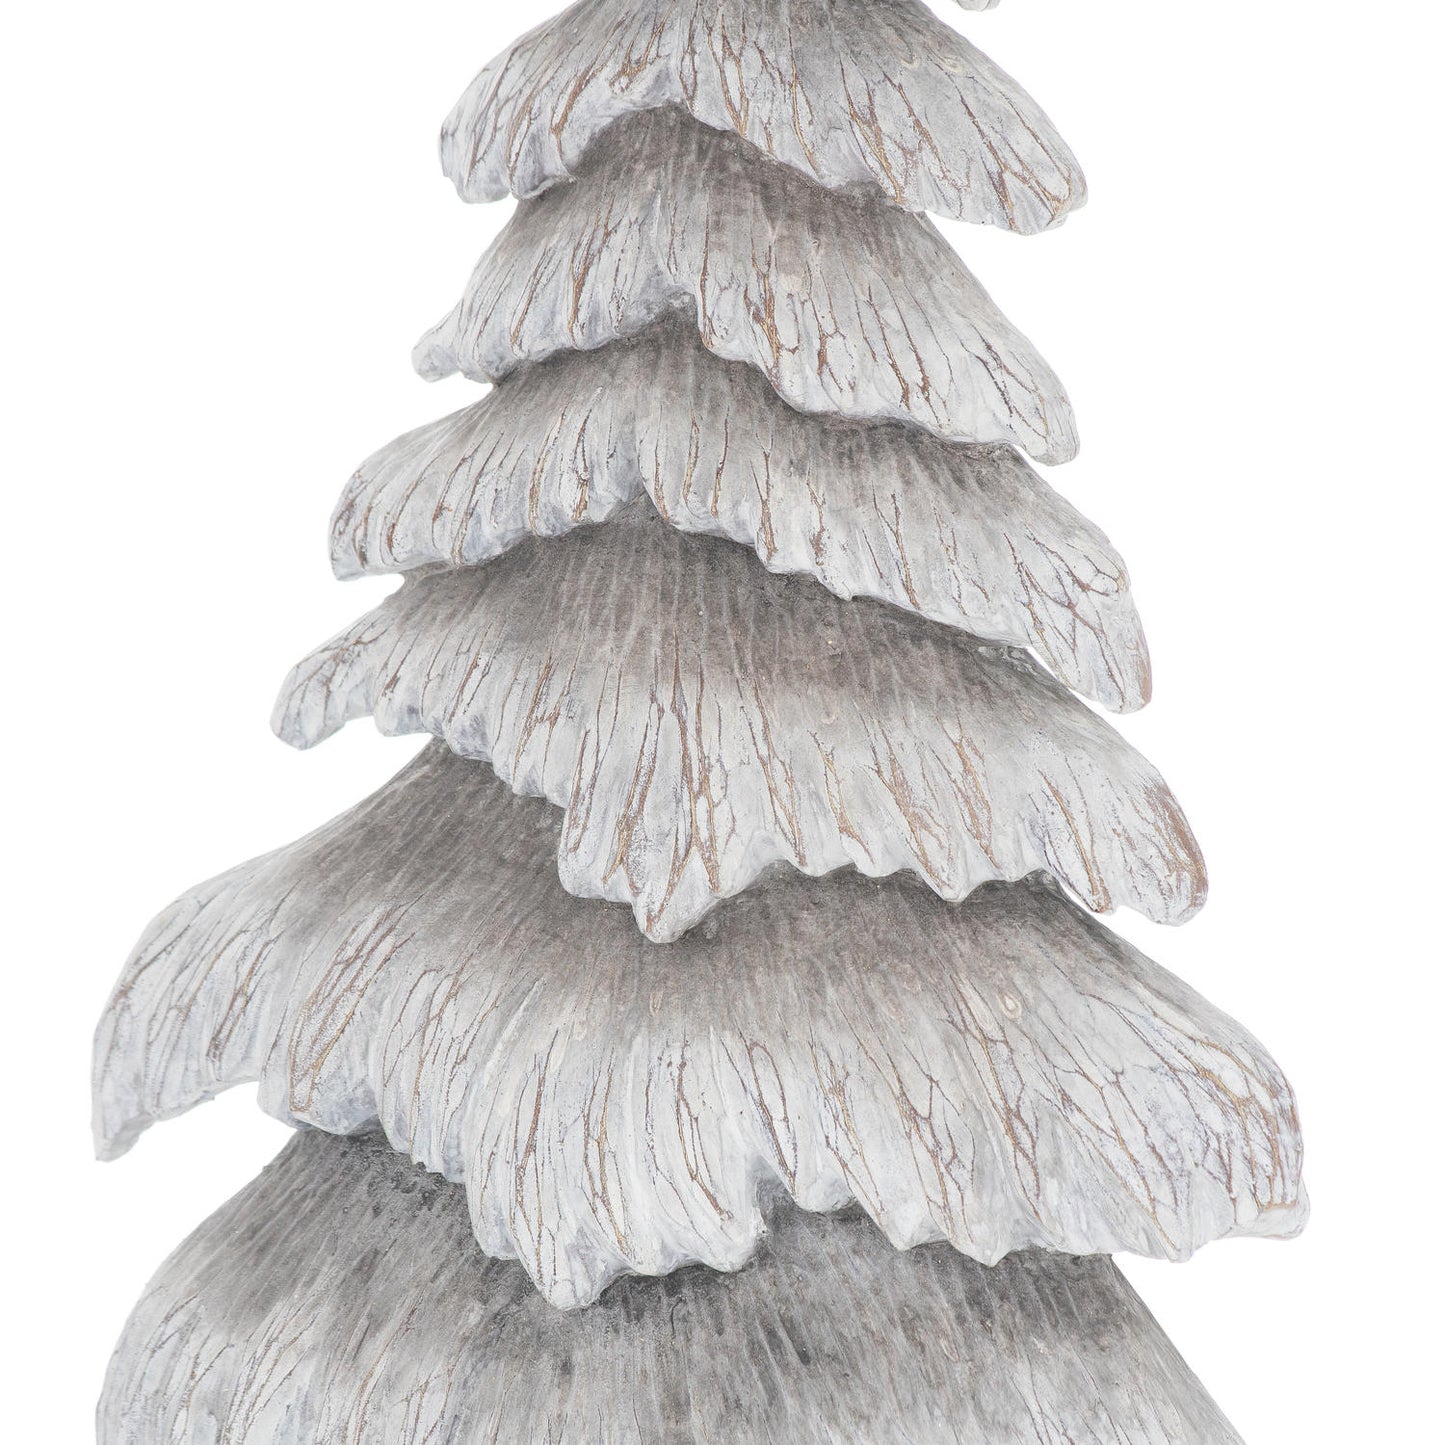 Carved Wood Effect Grey Small Snowy Tree